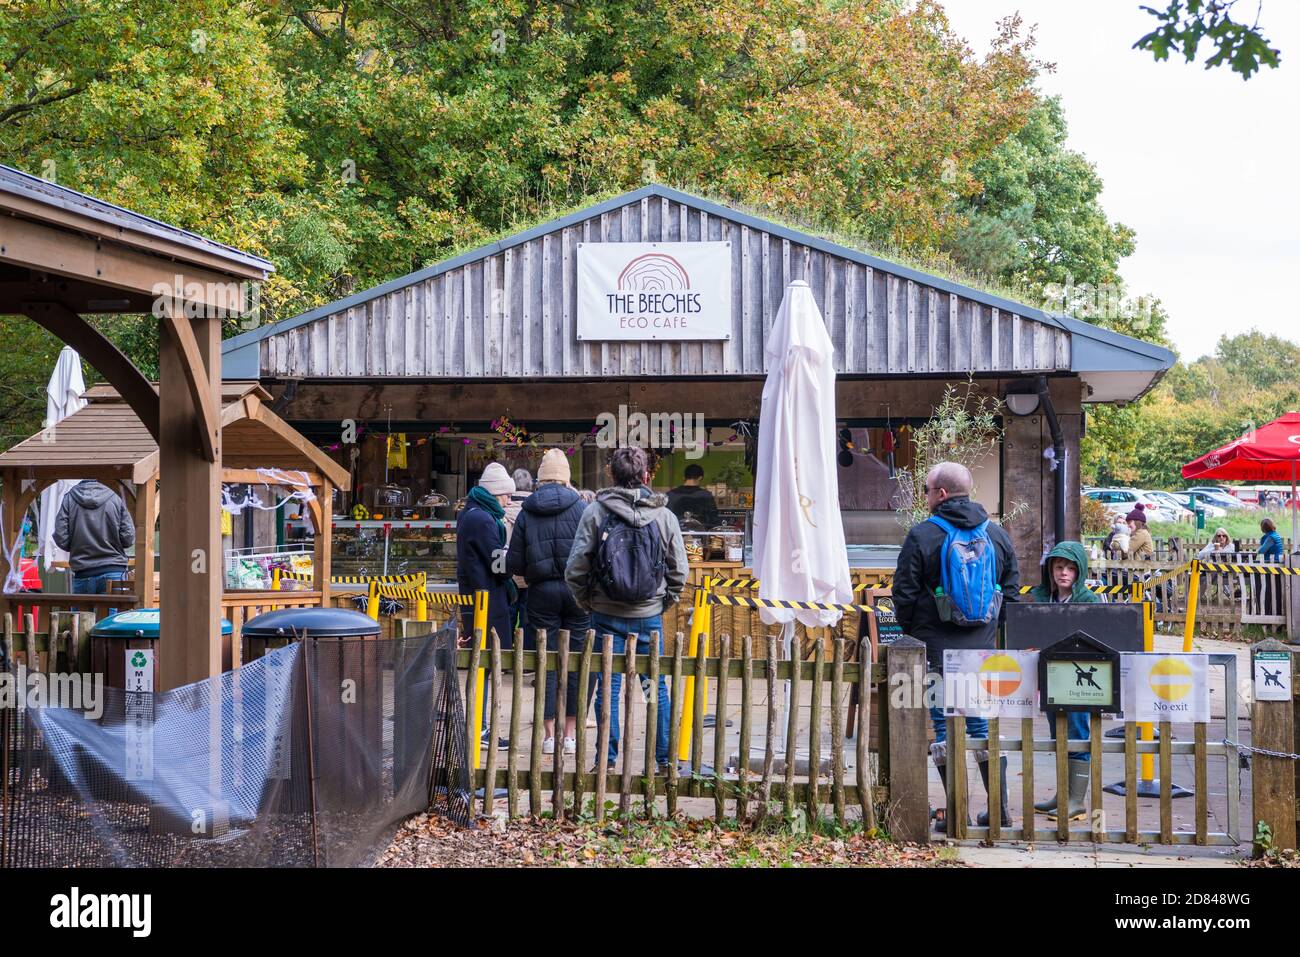 People out and about at Burnham Beeches nature reserve queuing for refreshments at The Beeches Eco Cafe, Burnham, Slough, Berkshire, England, UK Stock Photo